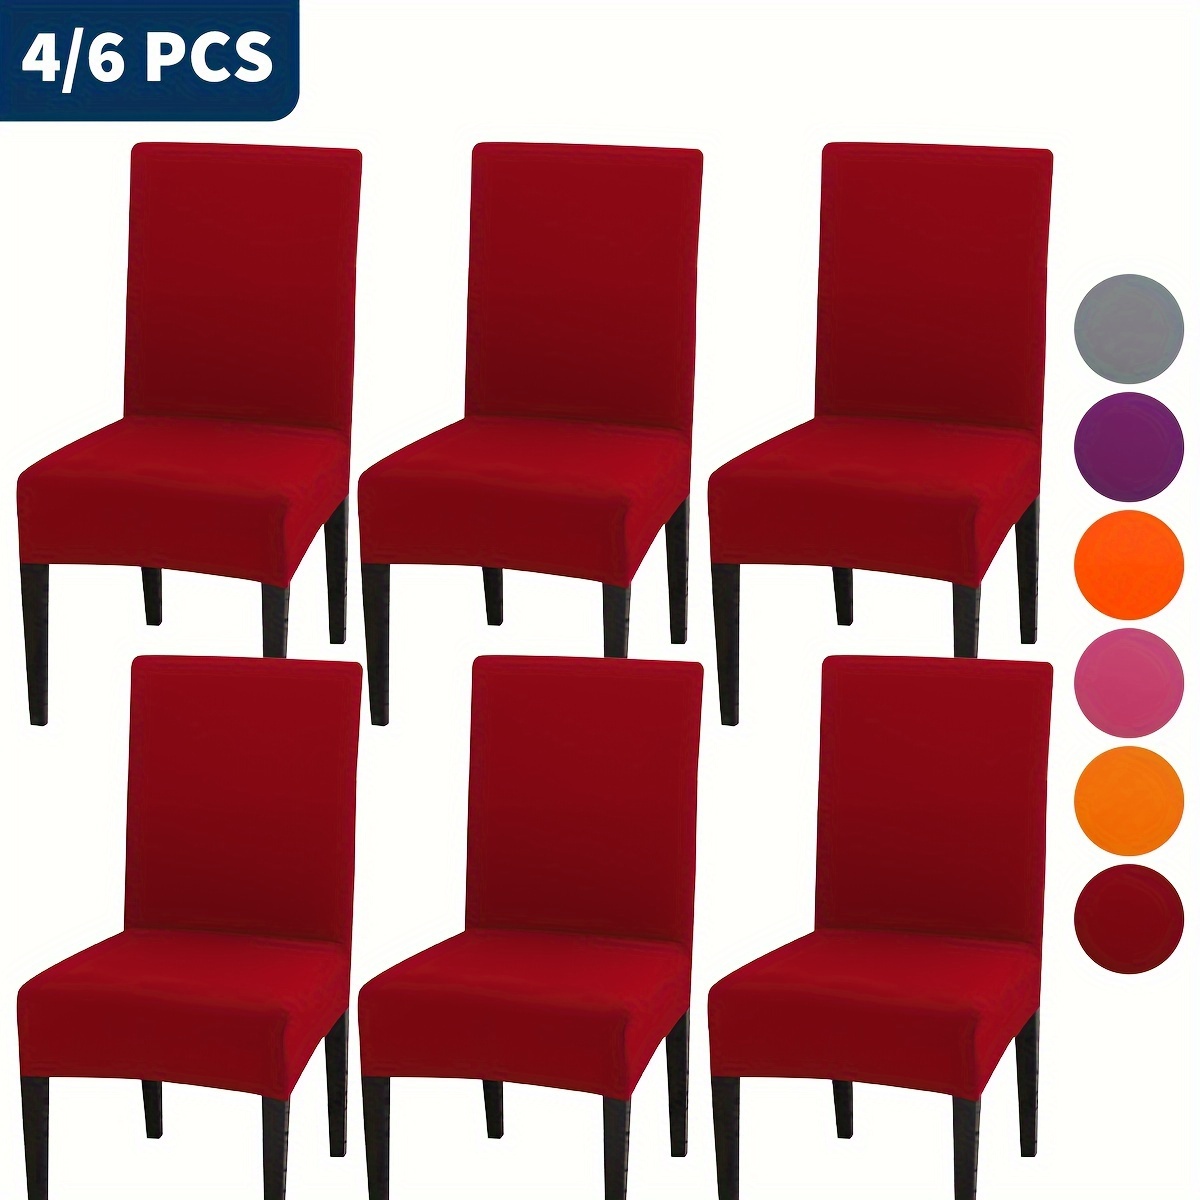 

4/6pcs 4 Seasons Solid Color Chair Cover Furniture Protector Chair Slipcover Home Decoration Living Room Kitchen Dining Room Easy Installation